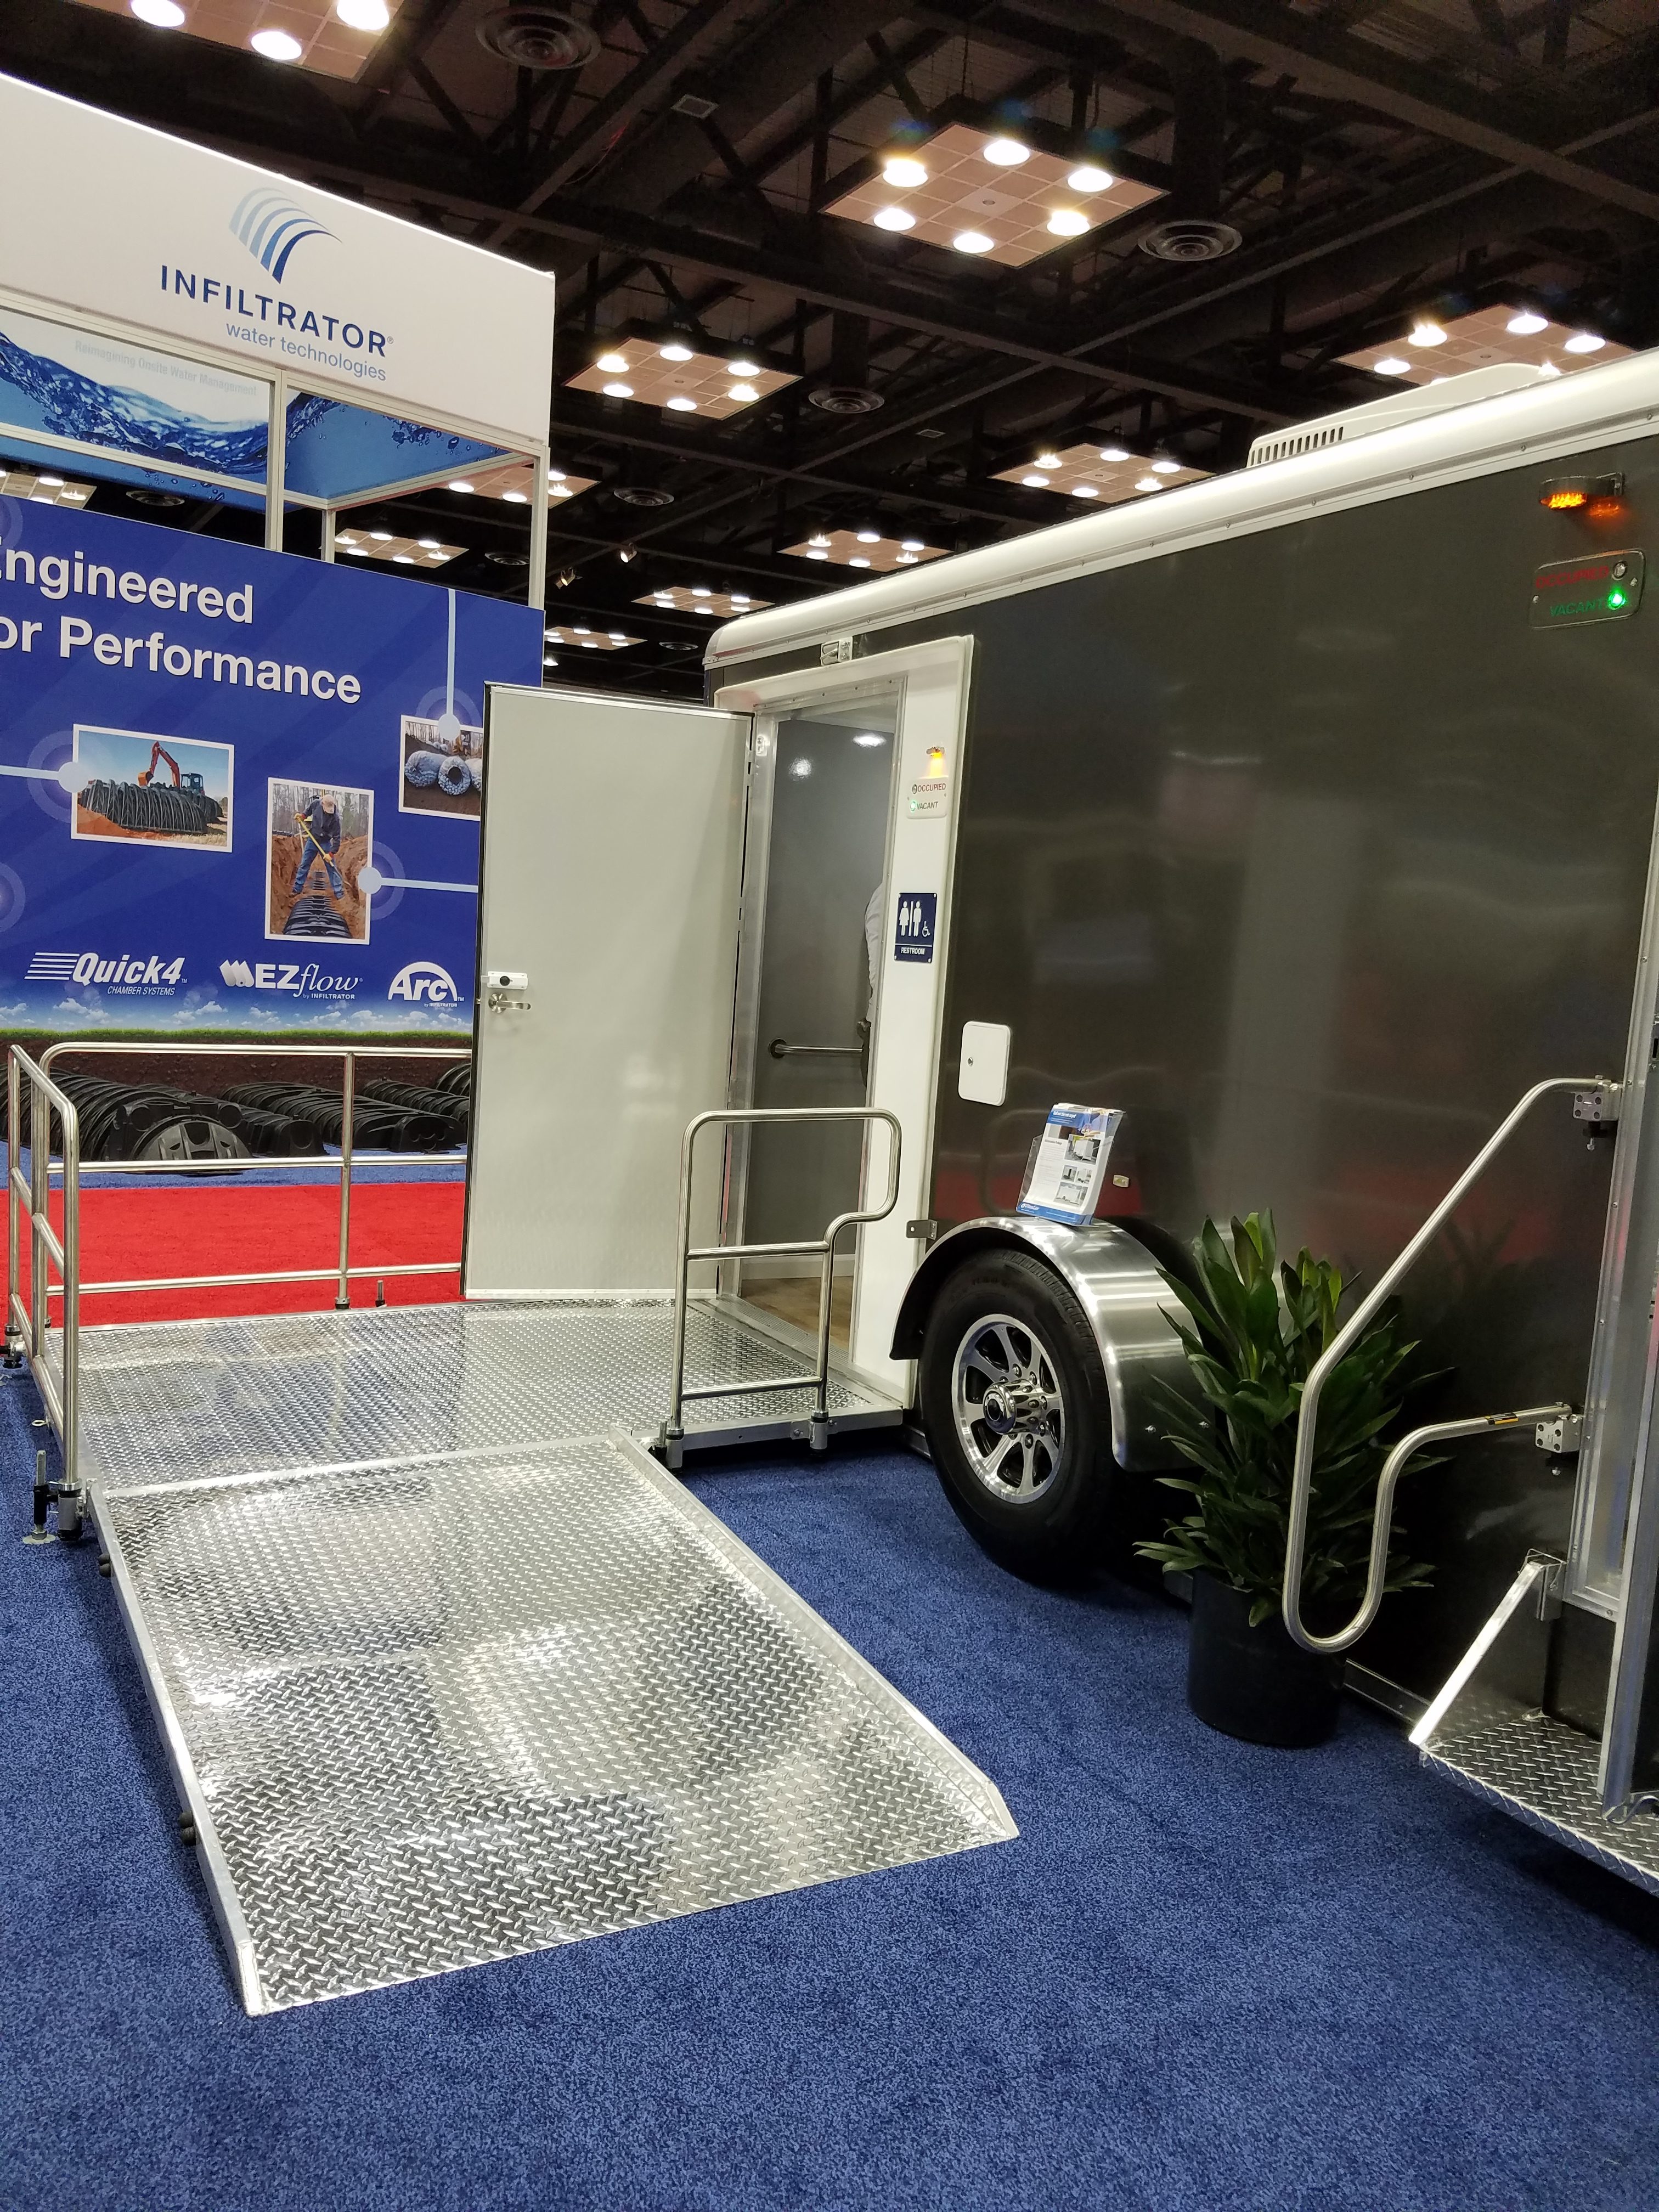 ADA Plus Two Station Vegas Restroom Trailer, Being Displayed at a Bridal Show, in Hartford CT 